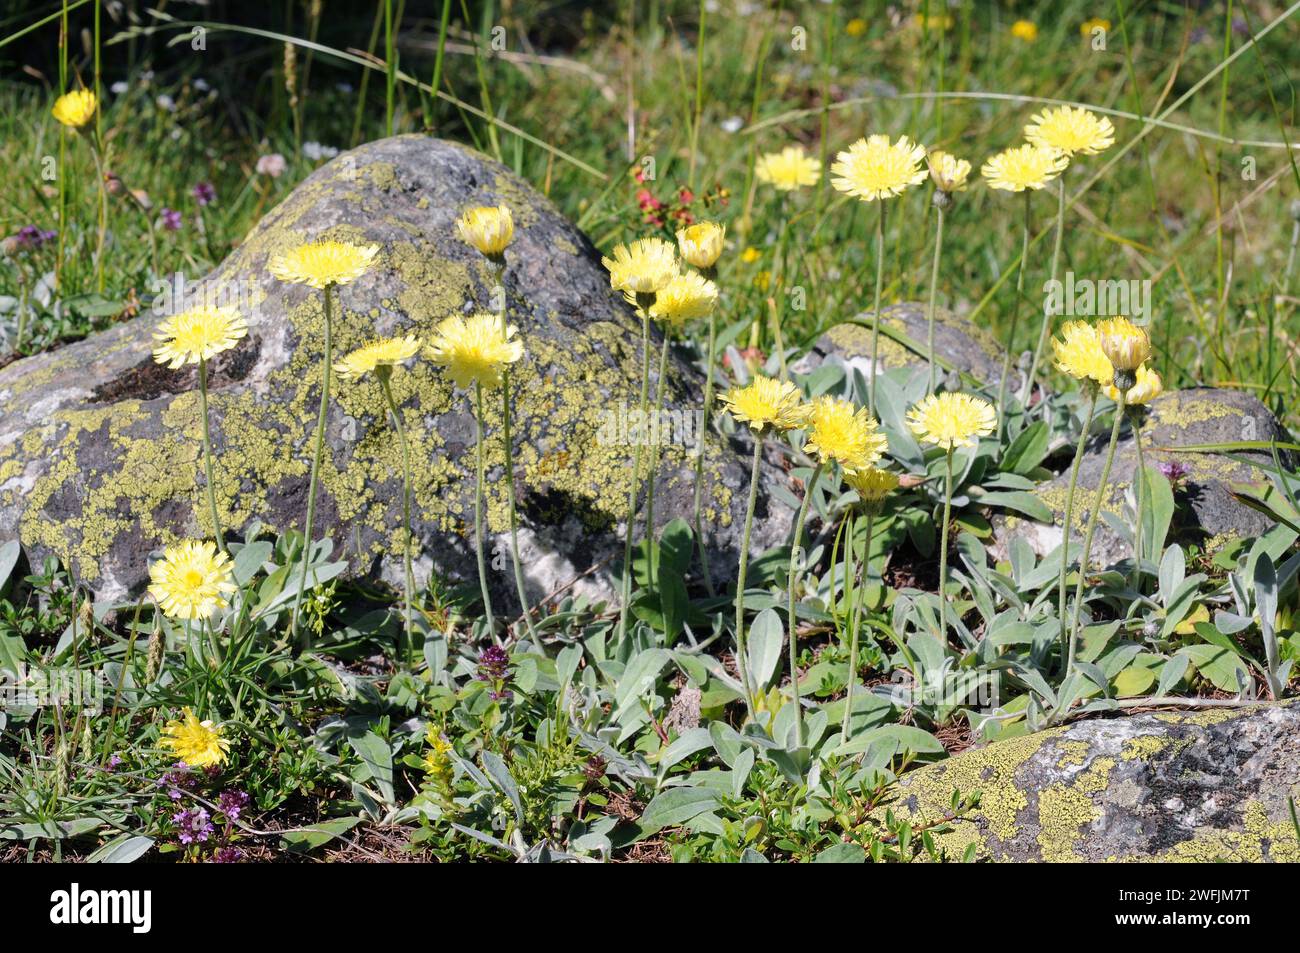 Mouse-ear hawkweed (Hieracium pilosella or Pilosella officinarum) is a perennial medicinal herb native to Europe and north Asia. This photo was taken Stock Photo